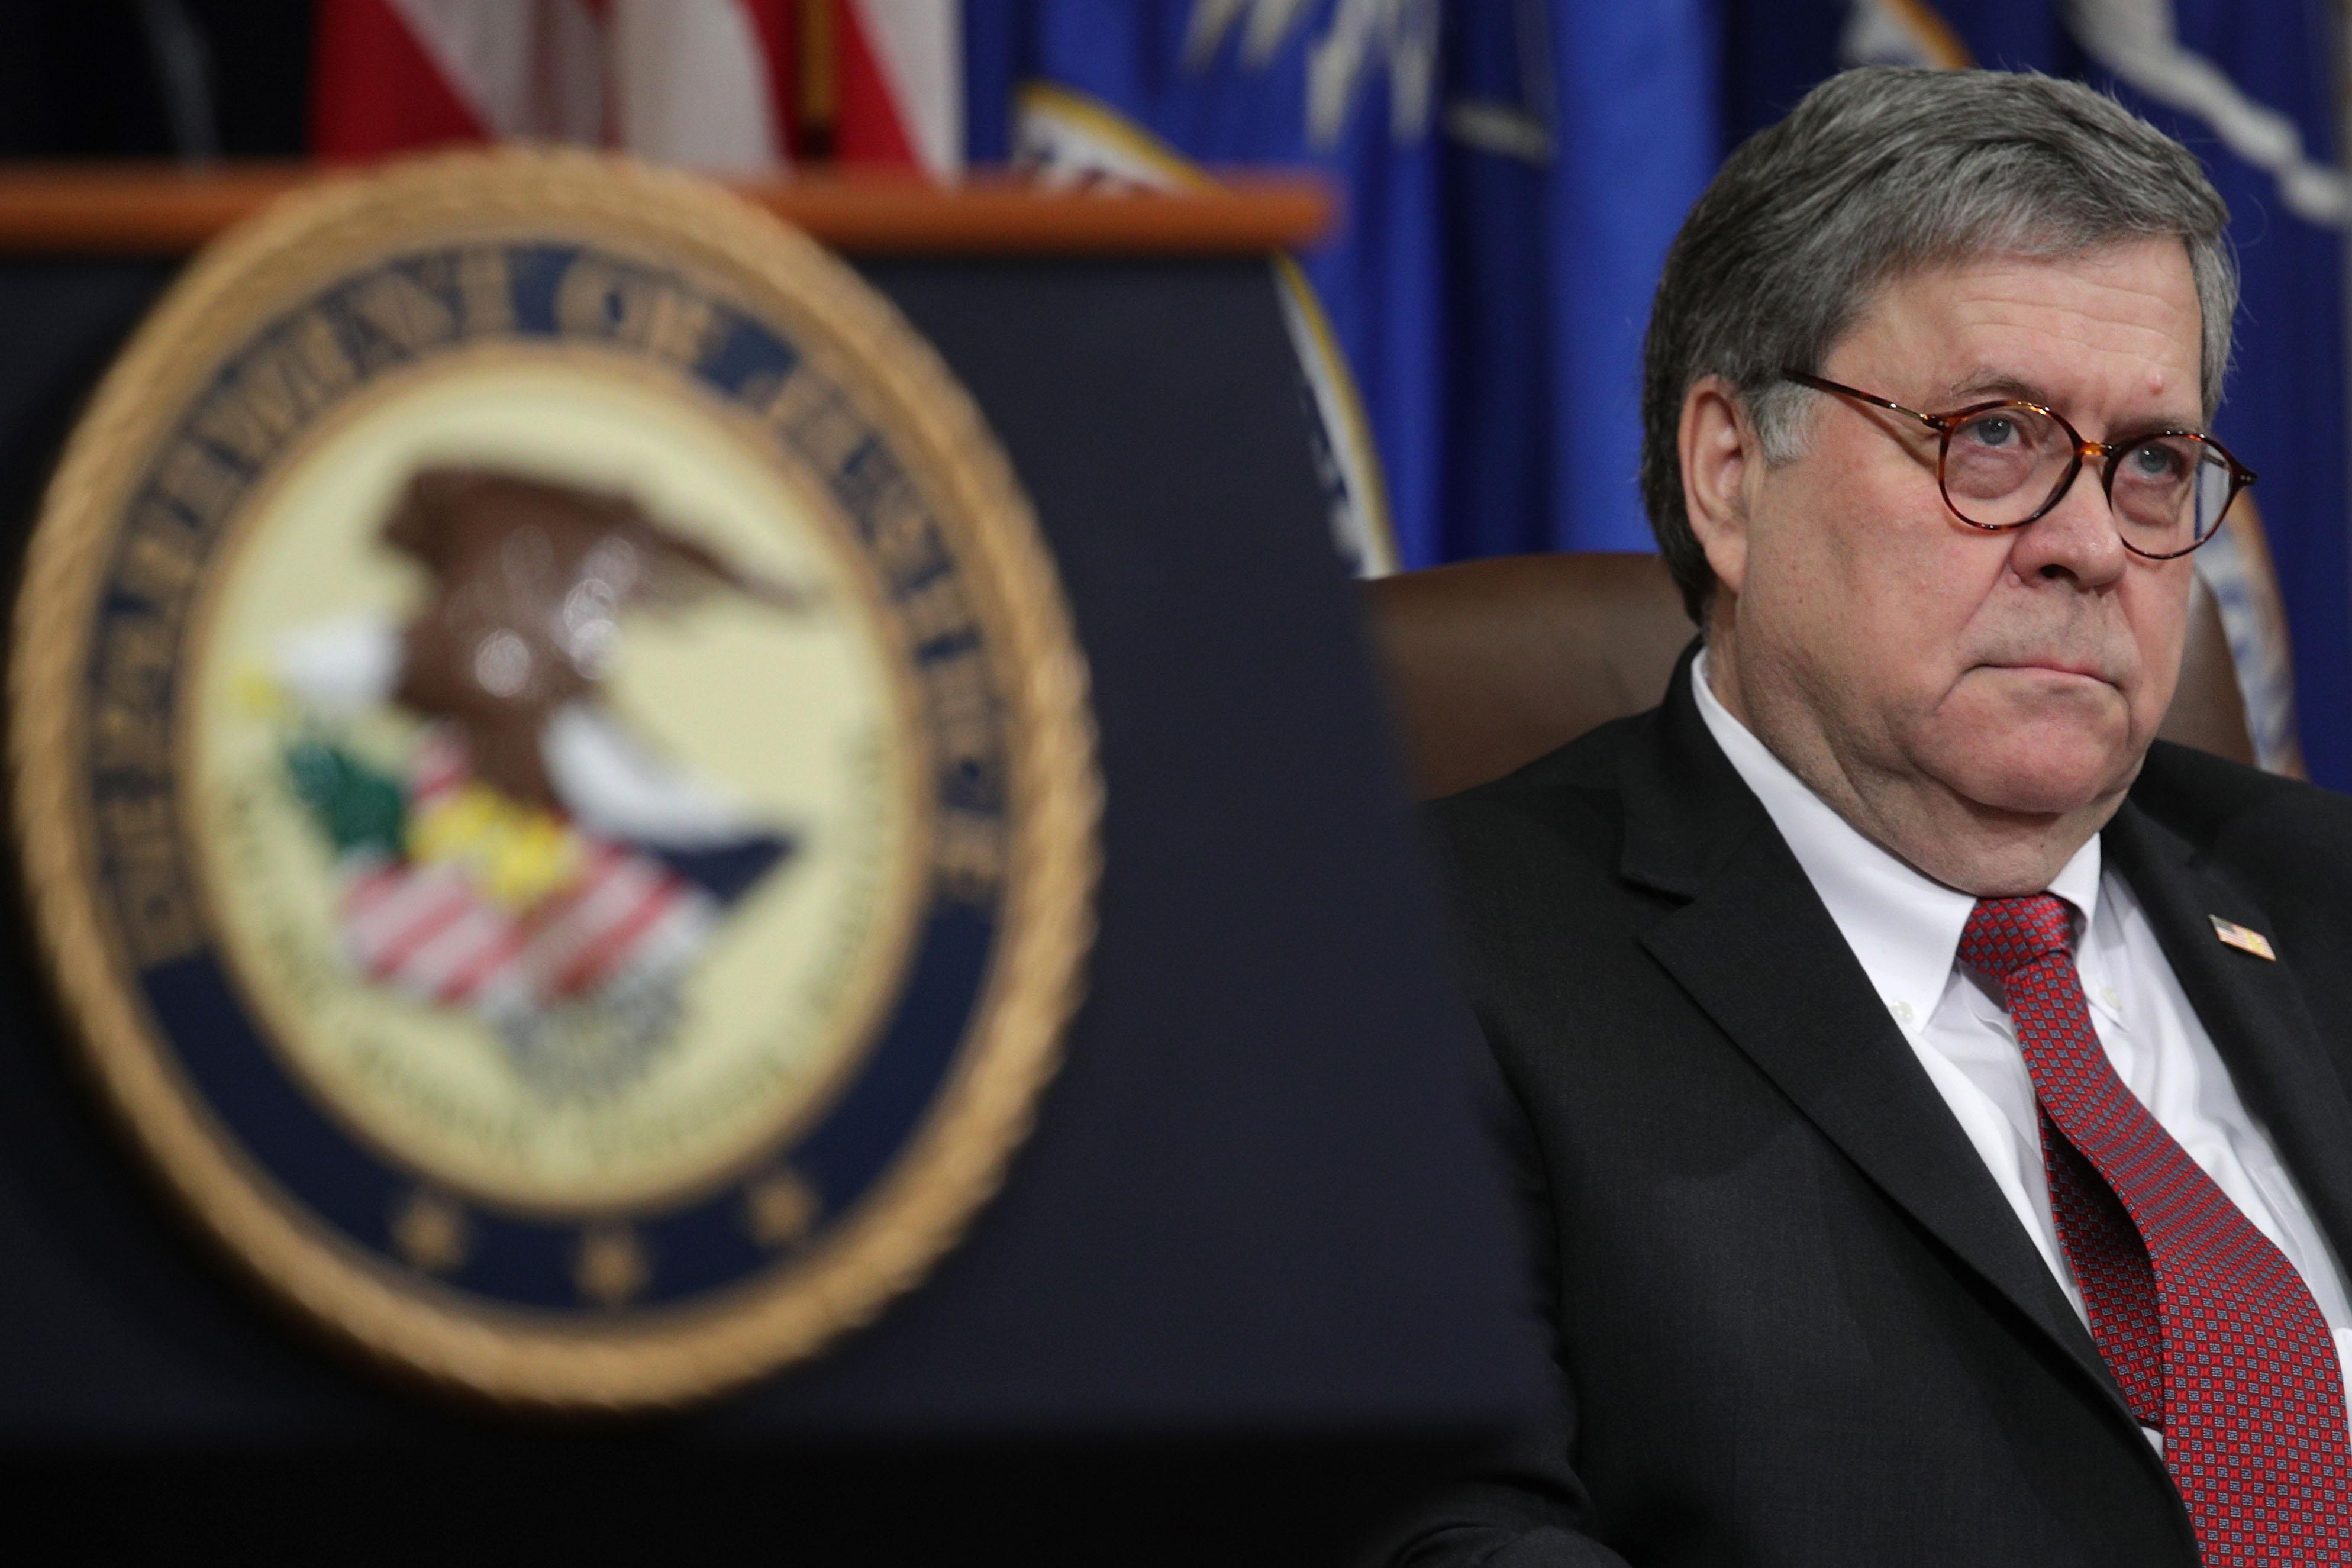 WASHINGTON, DC - FEBRUARY 26: U.S. Attorney General William Barr  listens during a Department of Justice African American History Month Observance Program at the Department of Justice February 26, 2019 in Washington, DC.   (Photo by Alex Wong/Getty Images)